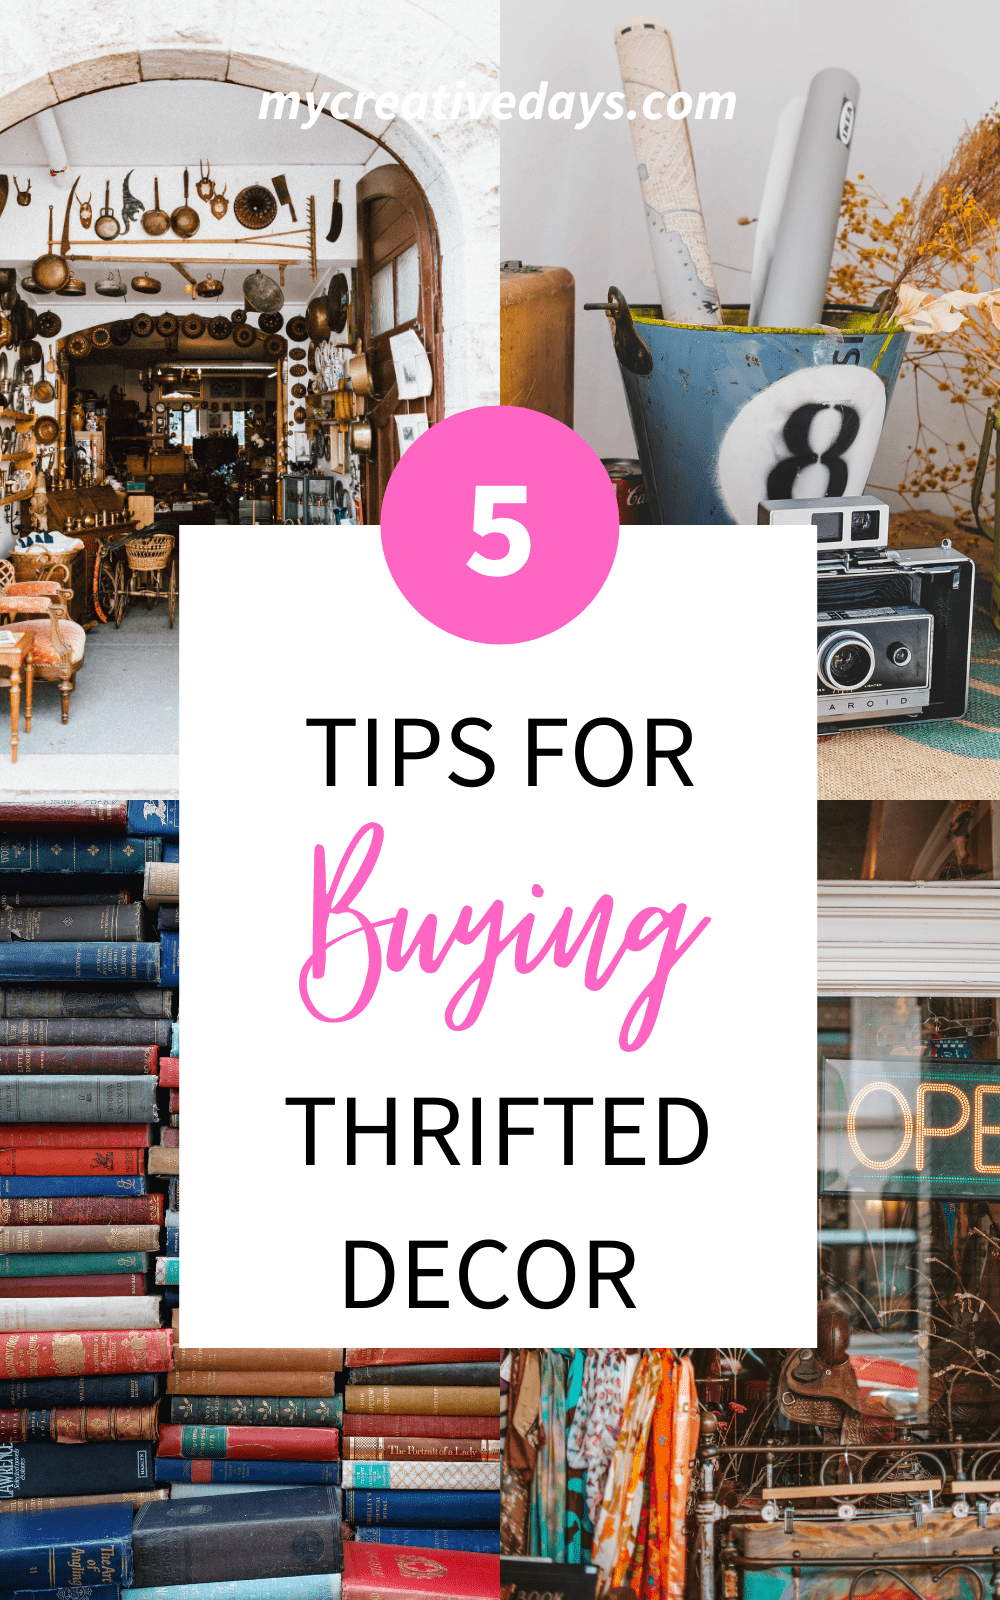 These 5 Tips For Buying Thrifted Decor ensure you are getting the most out of every shopping trip and decor purchase at the thrift store.